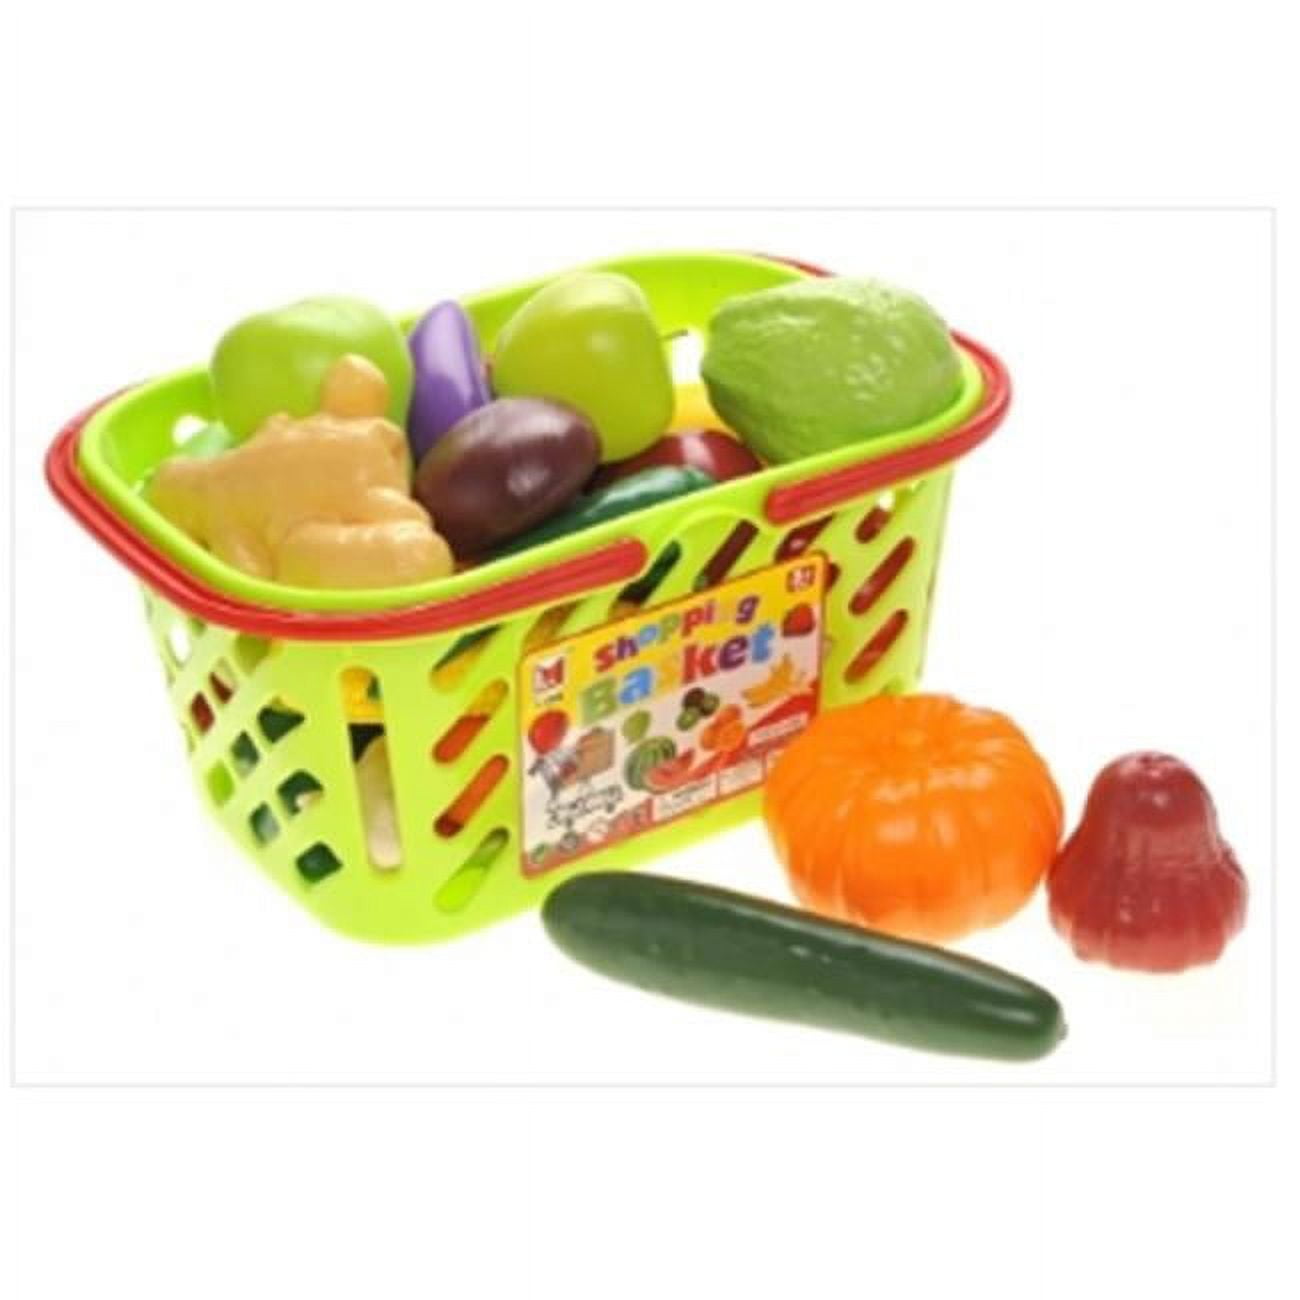 Ps608b Fruits & Vegetables Shopping Basket Grocery Play Food Set For Kids